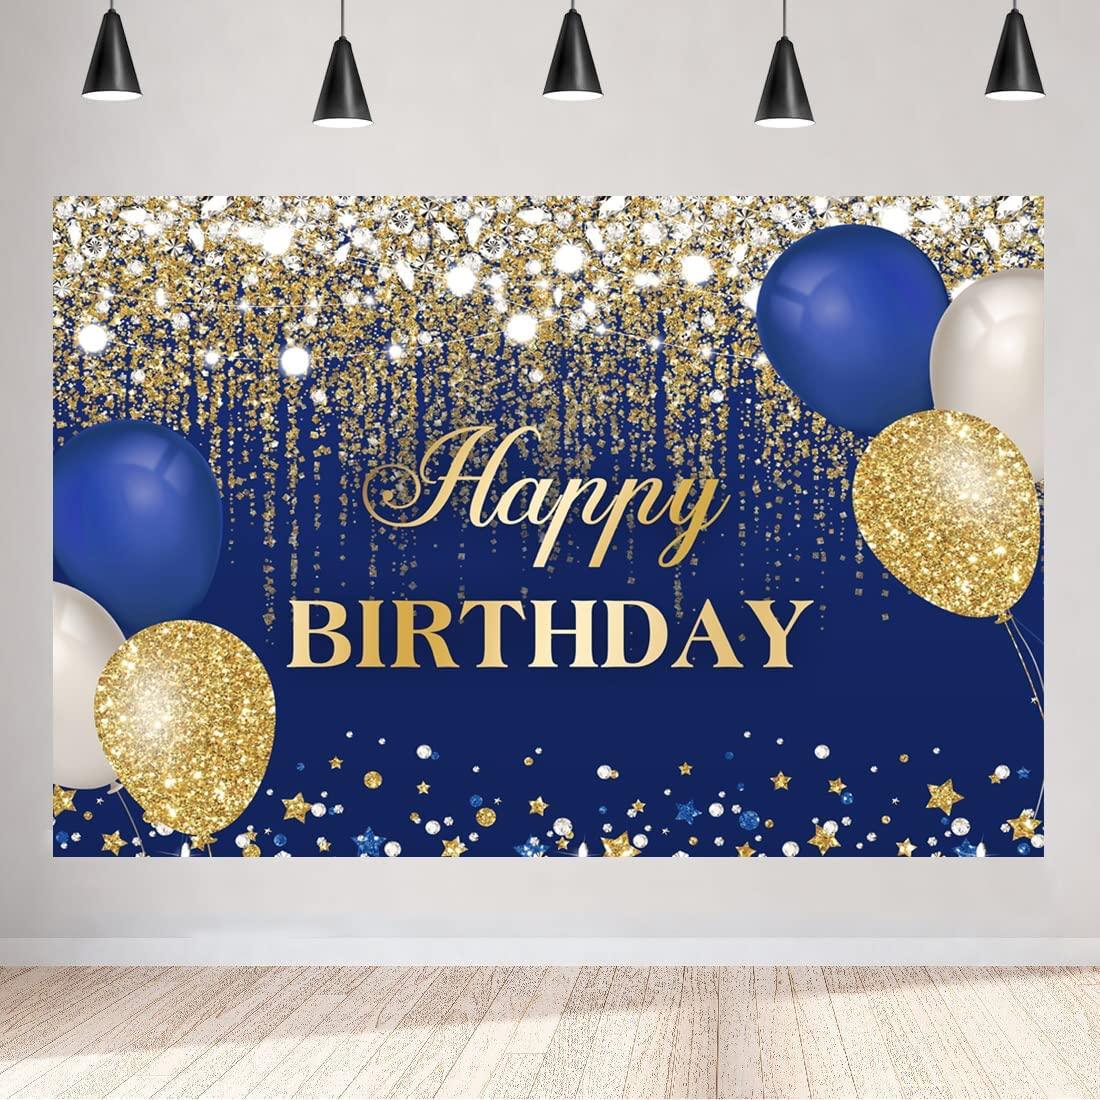 Blue and Gold Happy Birthday Backdrop Glitter Golden Dots Diamonds Balloons Sweet 16 Bday Photography Background - If you say i do